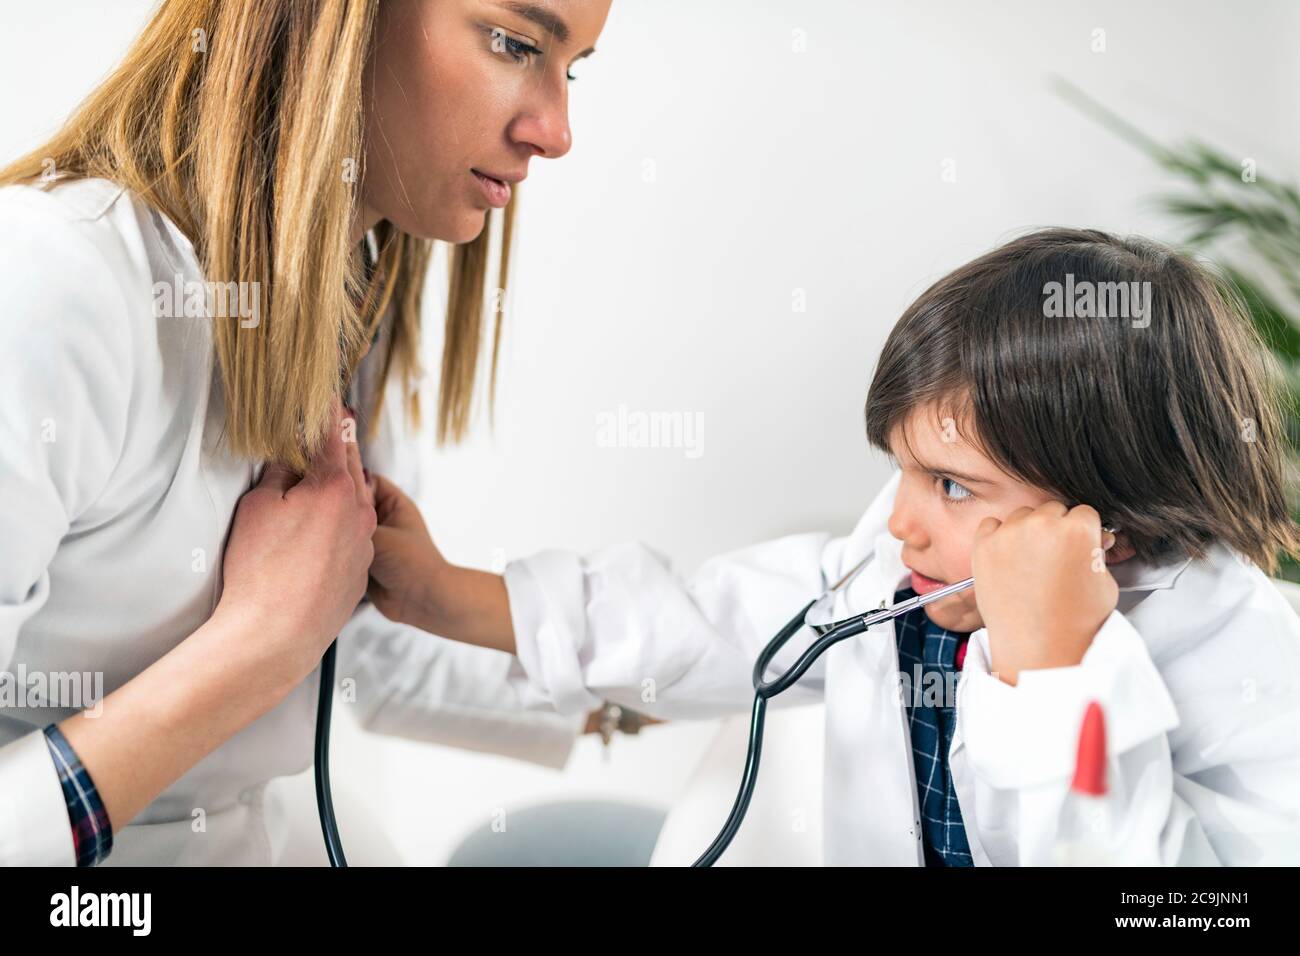 Little boy playing at being a doctor in a paediatrician's office. Stock Photo